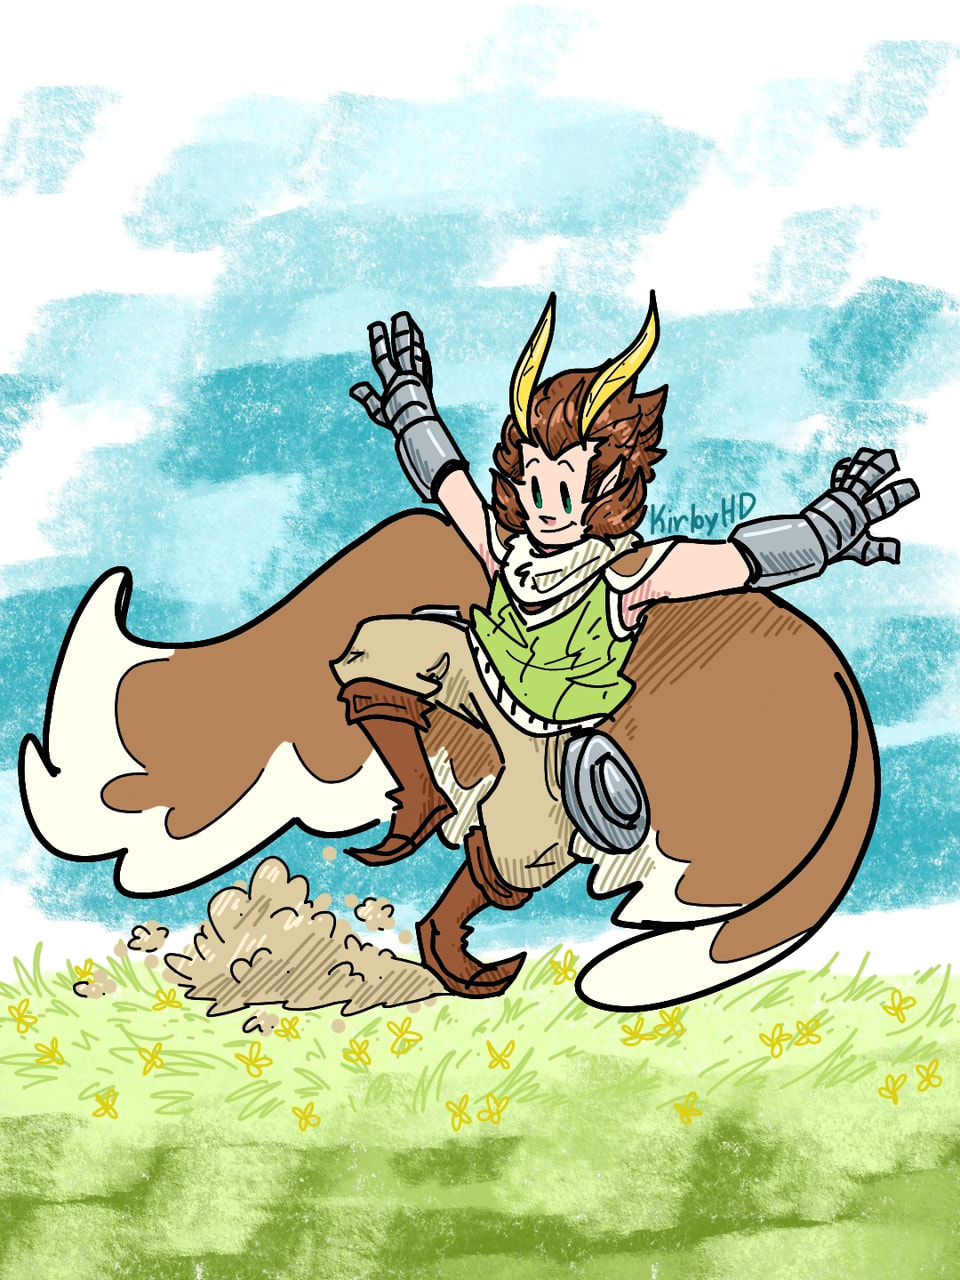 #fridayswithsketch #gamechallenge it was hard to choose my favorite character, but in the end, it was Otus from Owlboy! The game is absolutely beautiful and loveable, all the characters are loveable and the soundtrack is awesome #owlboy